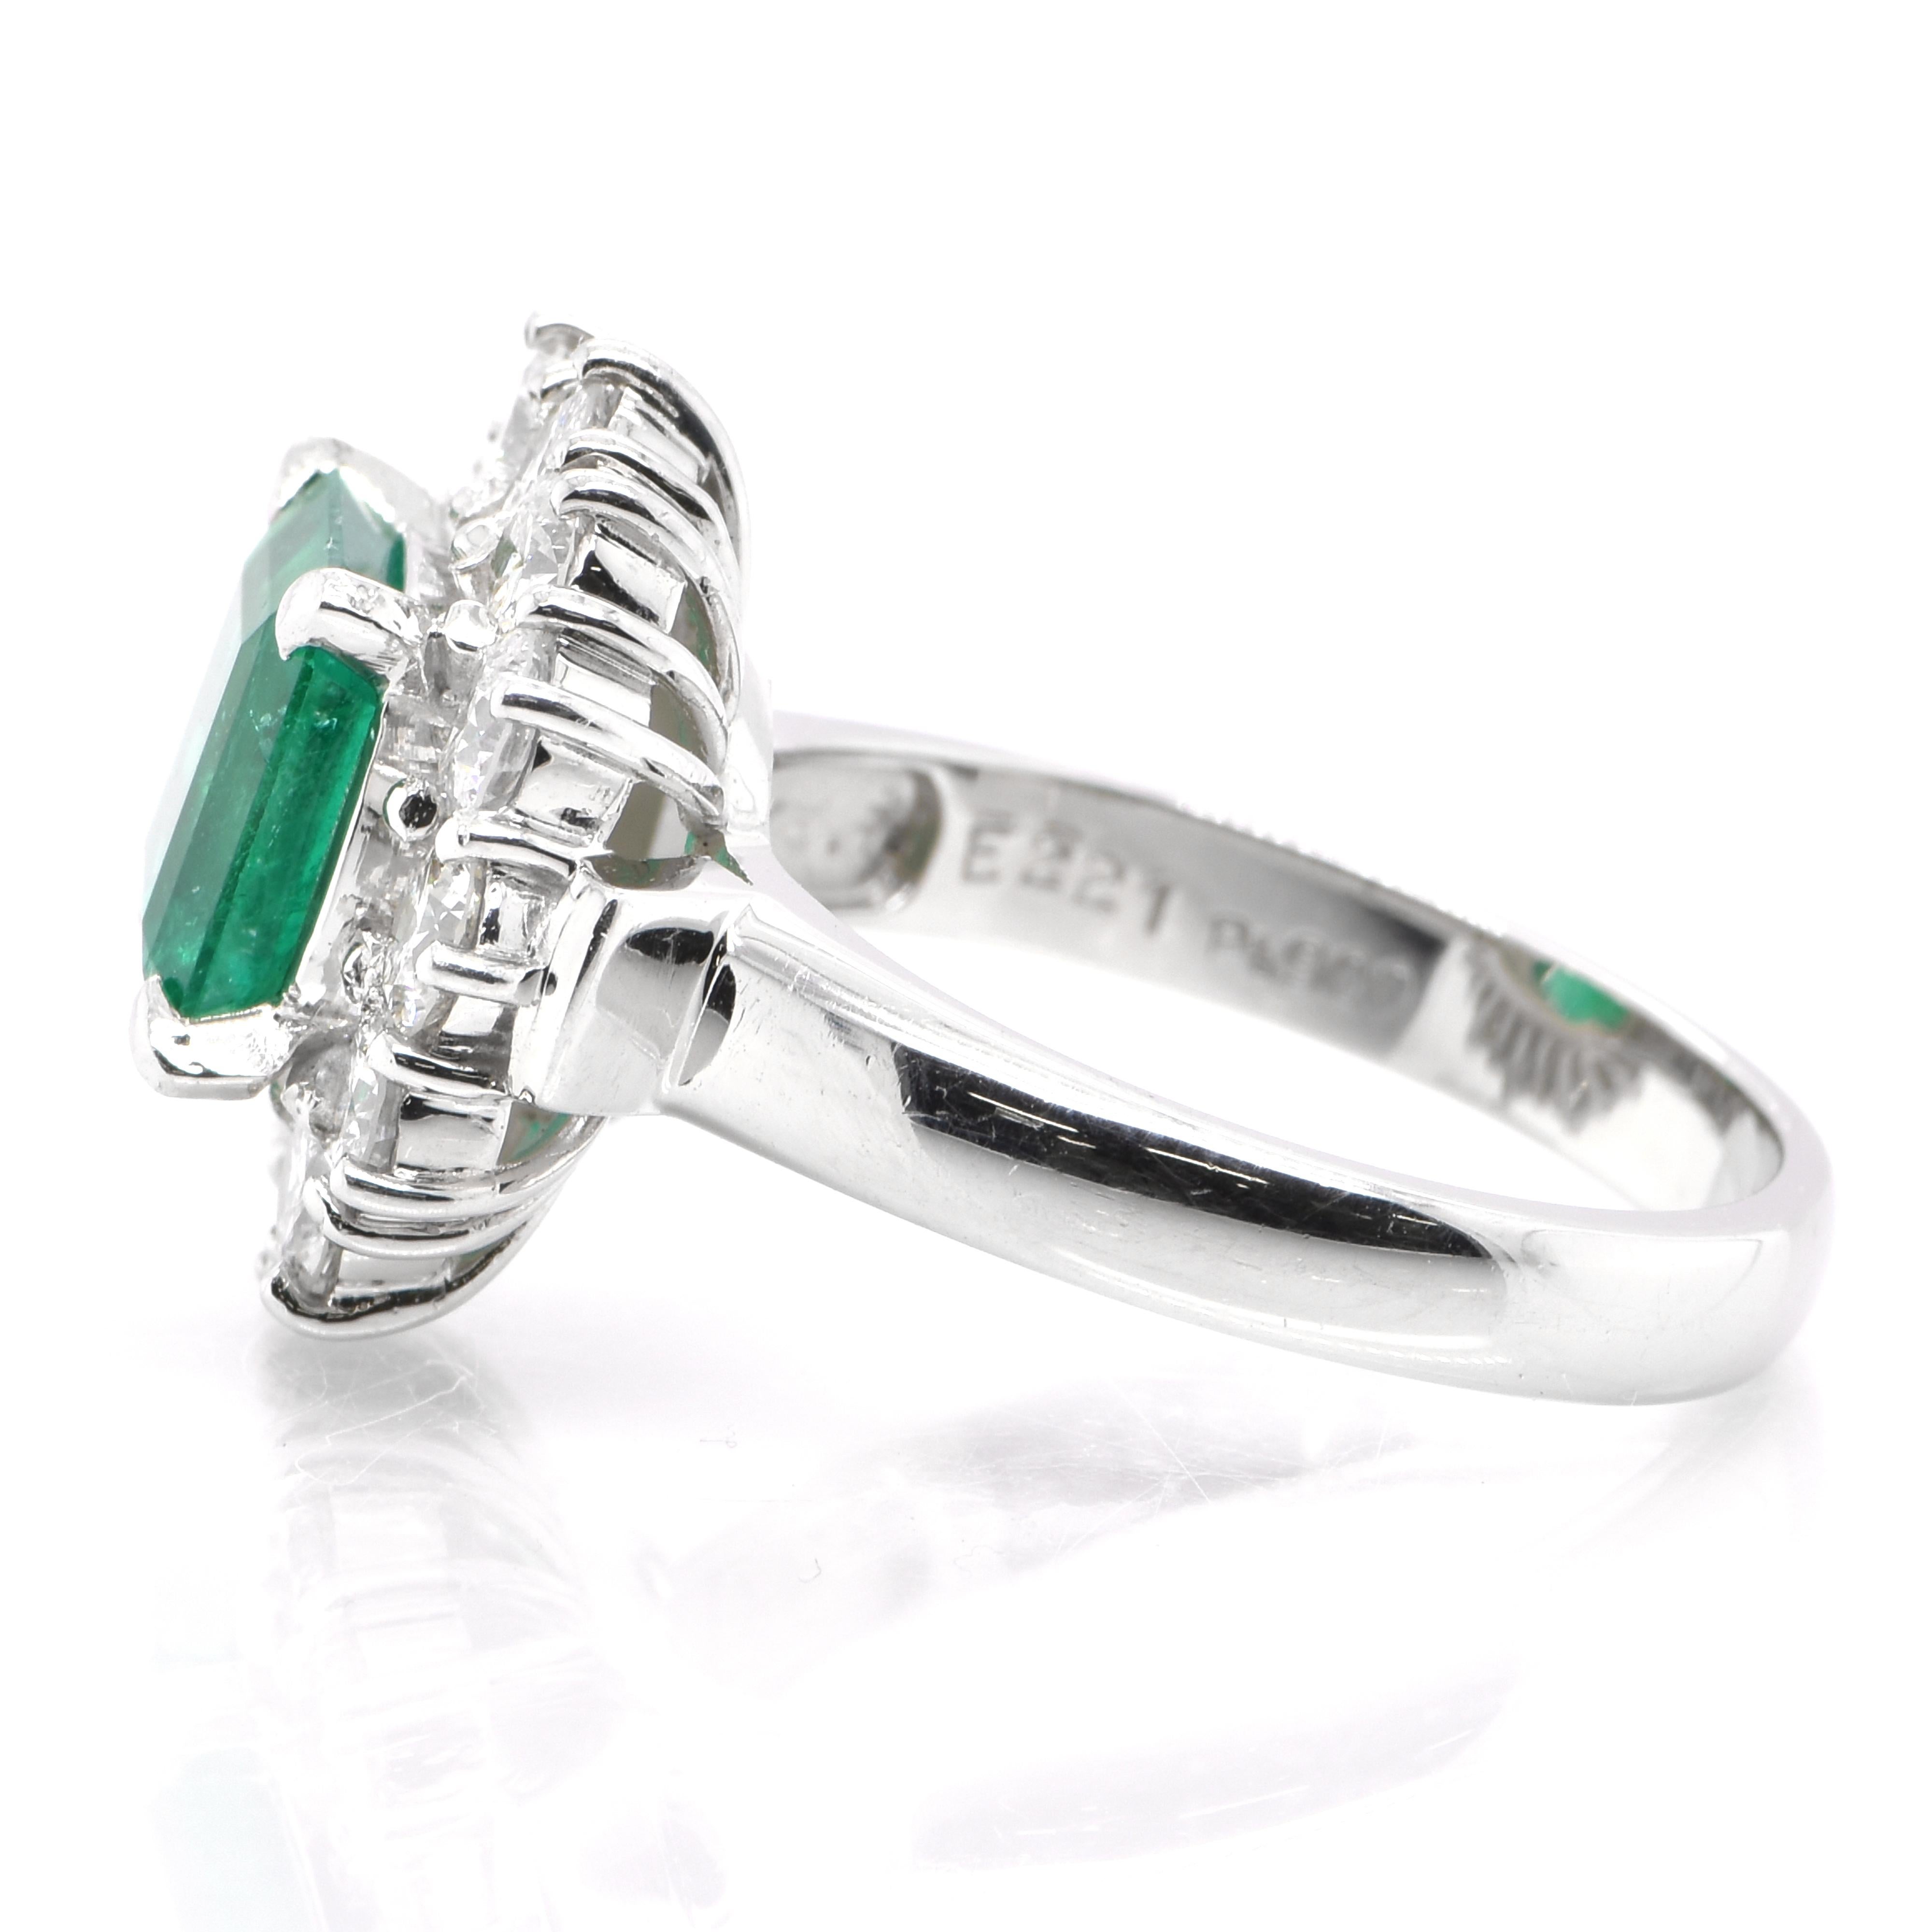 Emerald Cut GIA Certified 2.21 Carat Natural Emerald and Diamond Halo Ring Set in Platinum